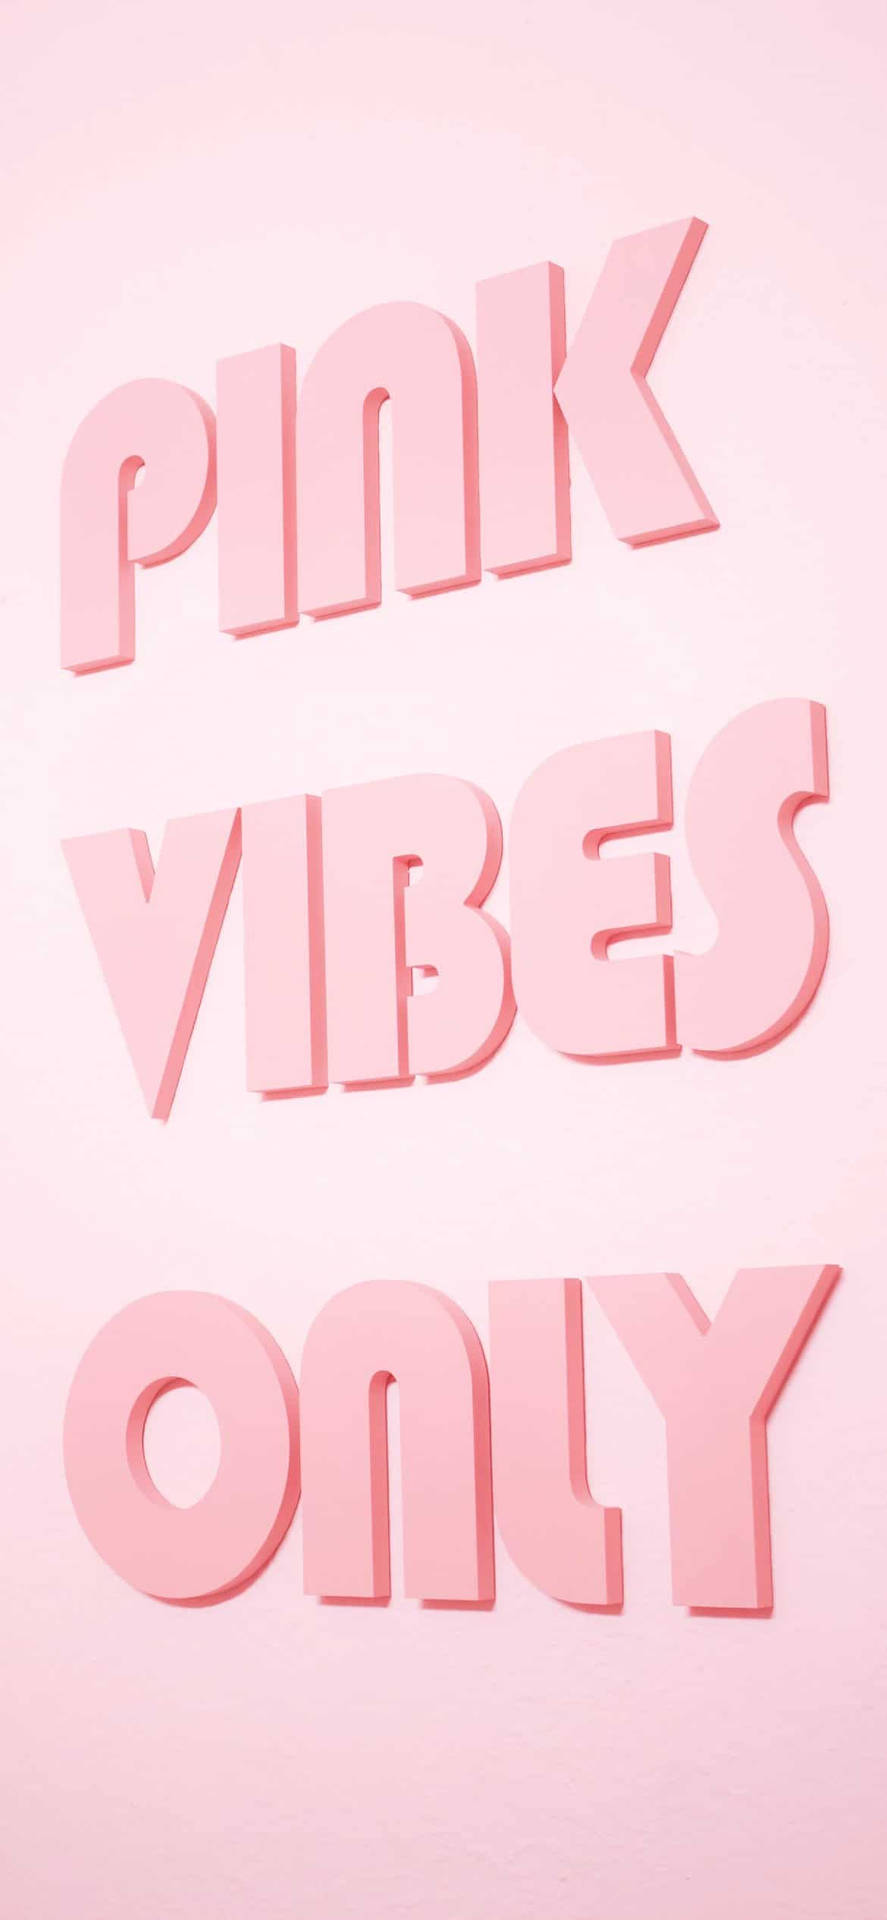 Aesthetic Girly Pink Vibes Only Wallpaper